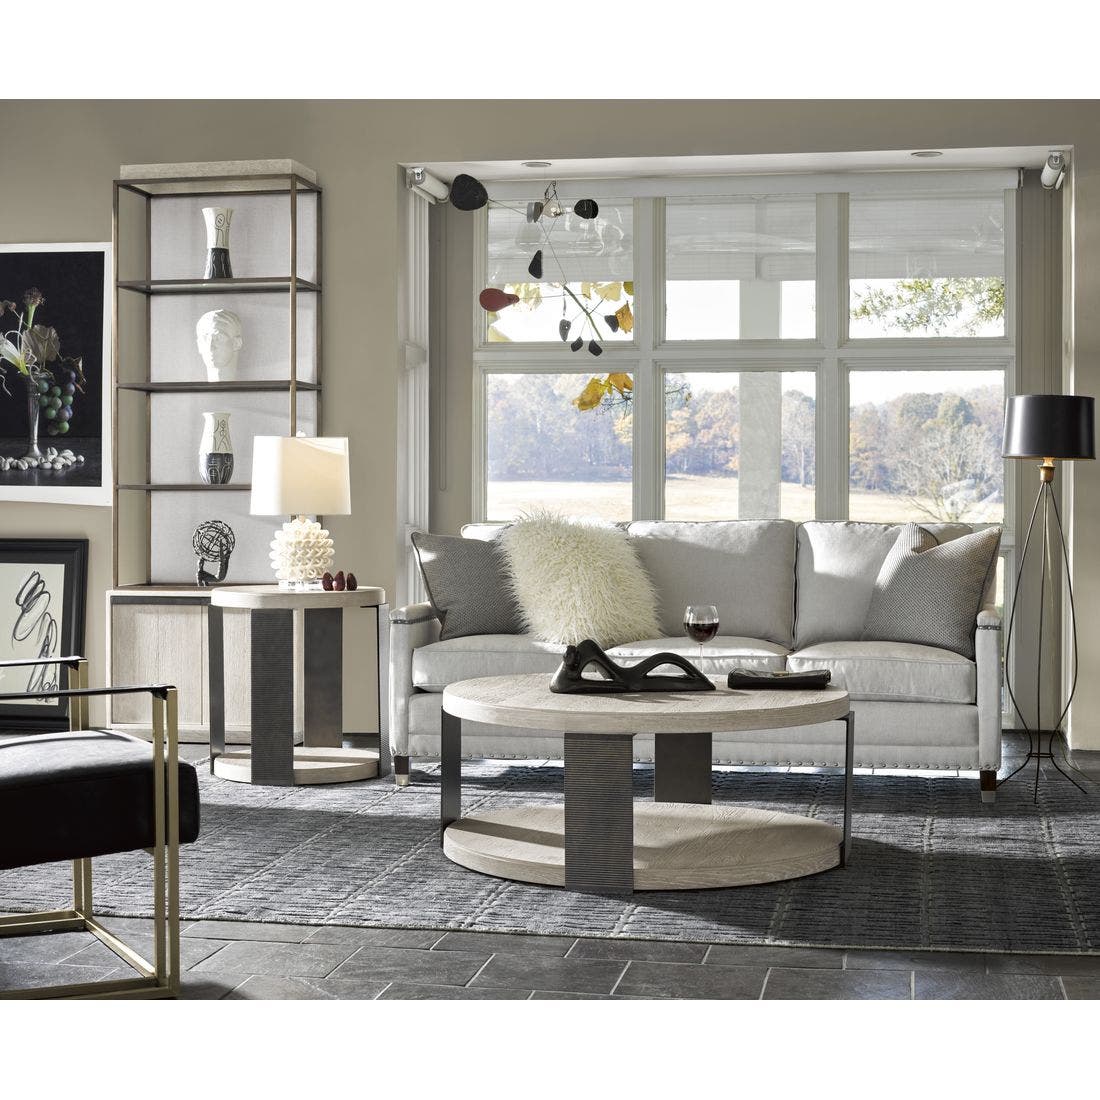 19134650-643818-furniture-living-room-coffee-table-31